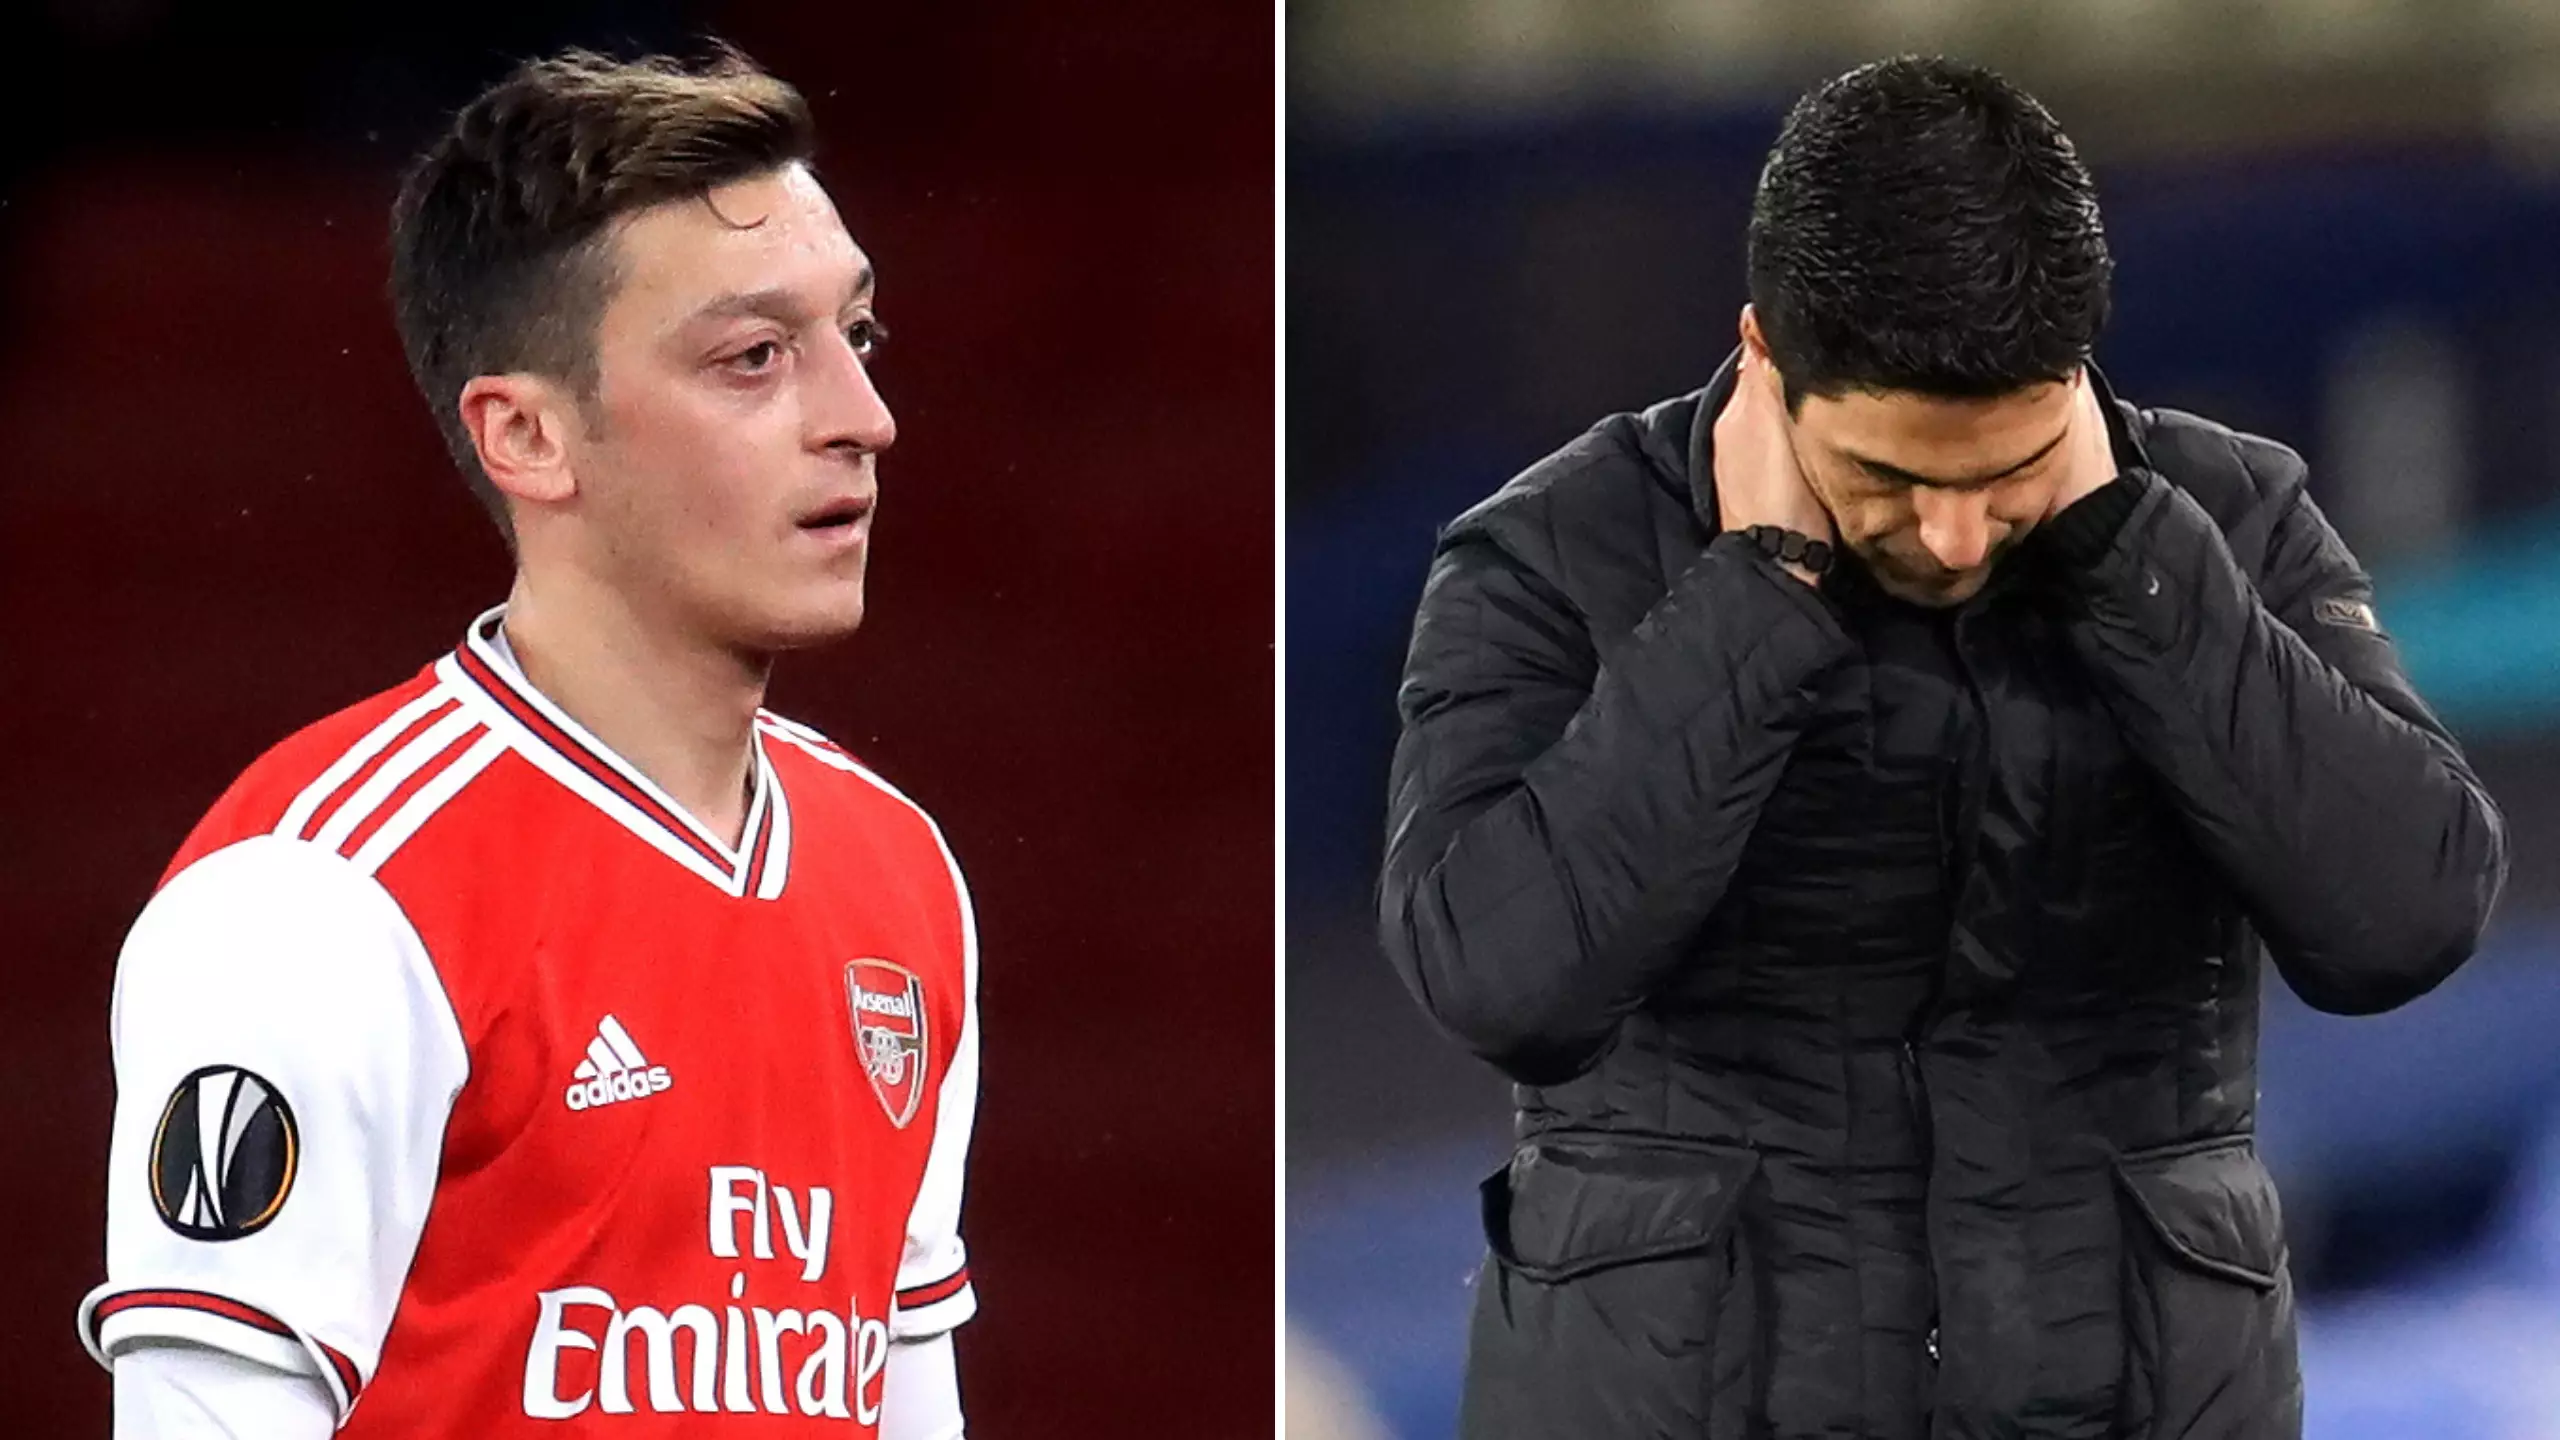 Arsenal Fans Think Mesut Ozil Has Aimed A Dig At Mikel Arteta With 'Most Underrated Player' Choice